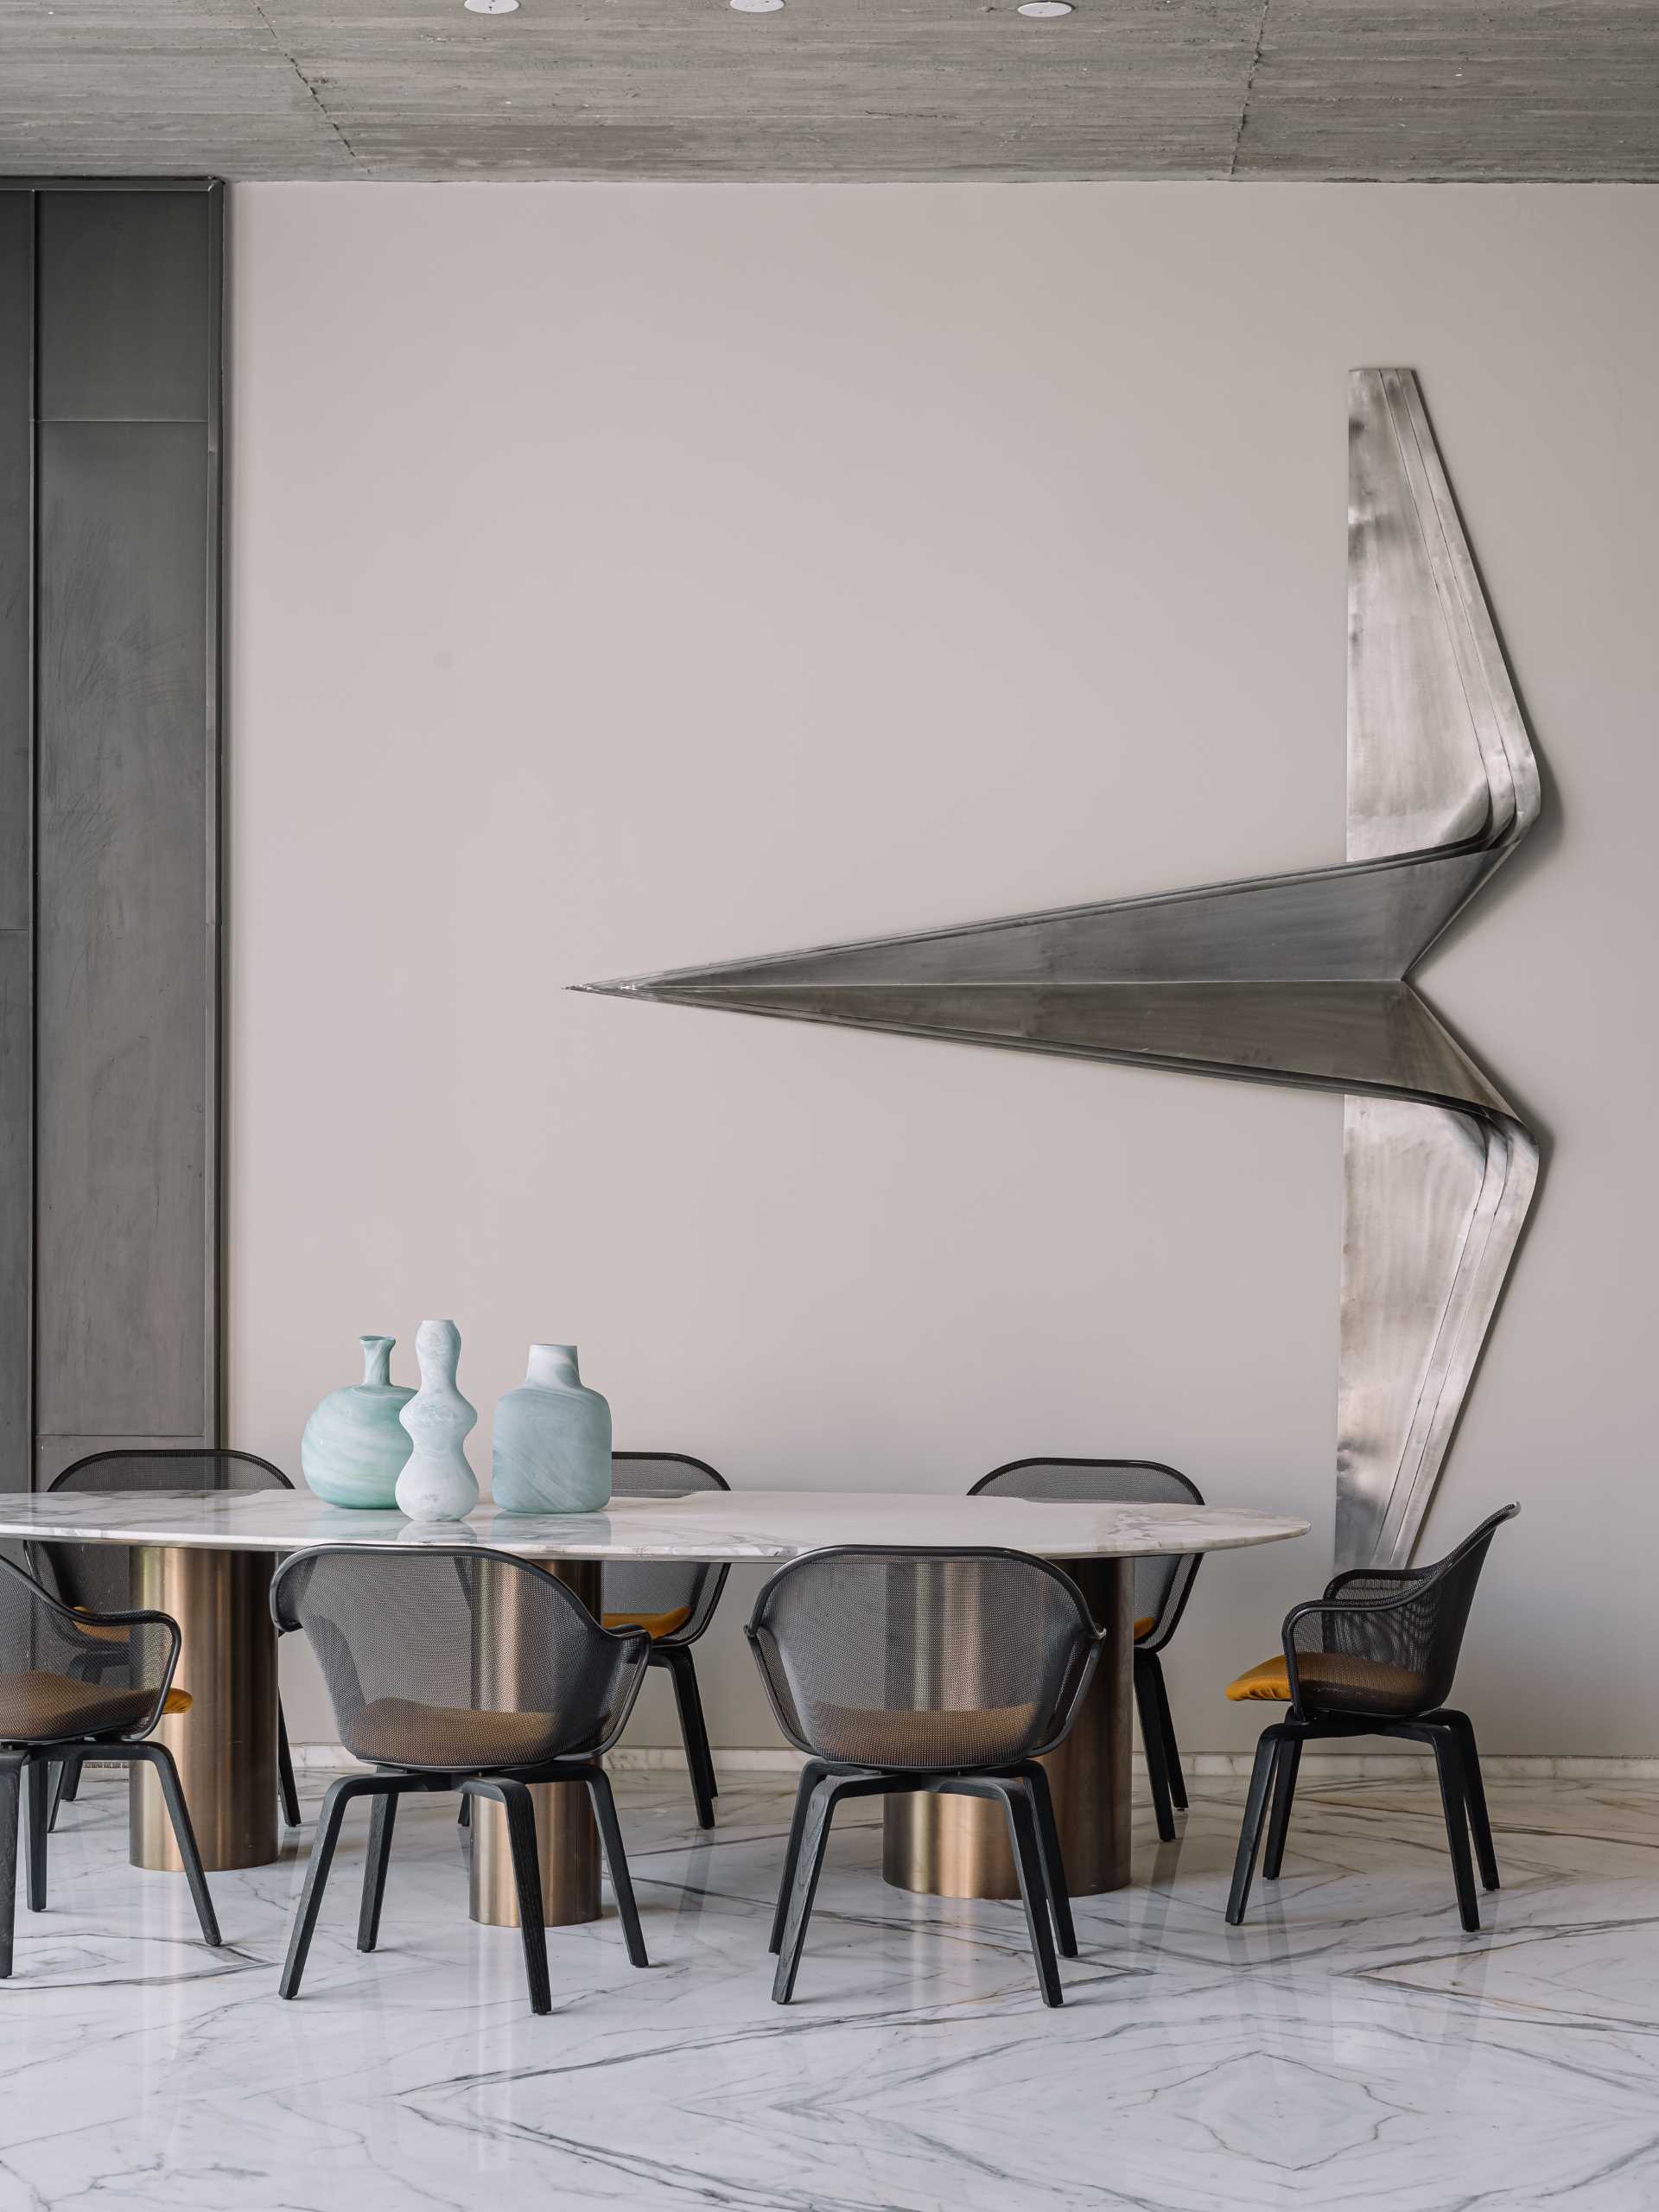 A modern dining room with a high ceiling and a metal sculpture on the wall.